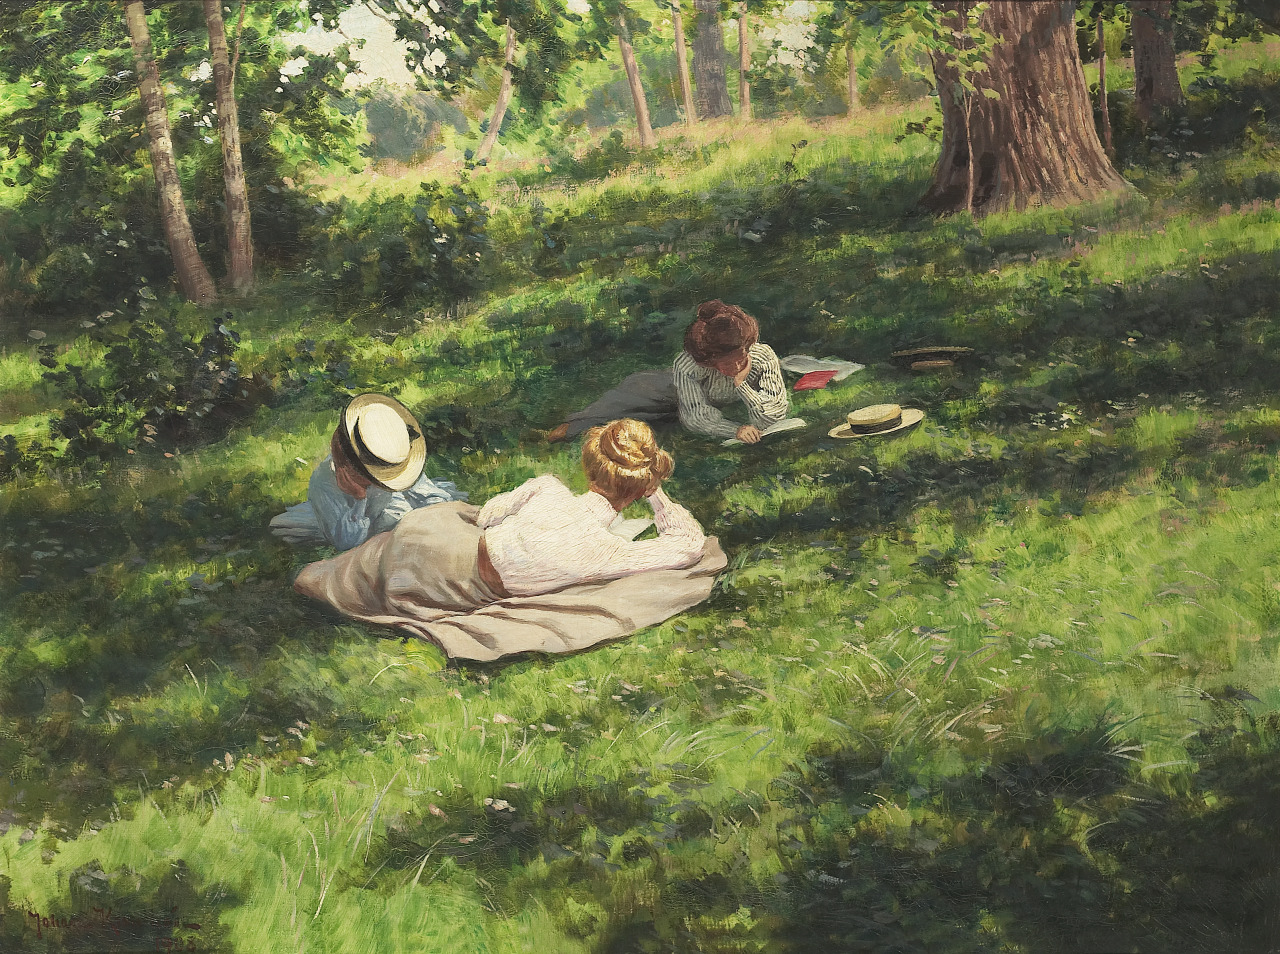 Three reading women in a summer landscape (1908). Johan Krouthén (Swedish, 1858-1932). Oil on canvas.
In 1909 Krouthén moved to Stockholm with his family, acquiring a studio at Valhallavägen. He was not particularly interested in contemporary art,...